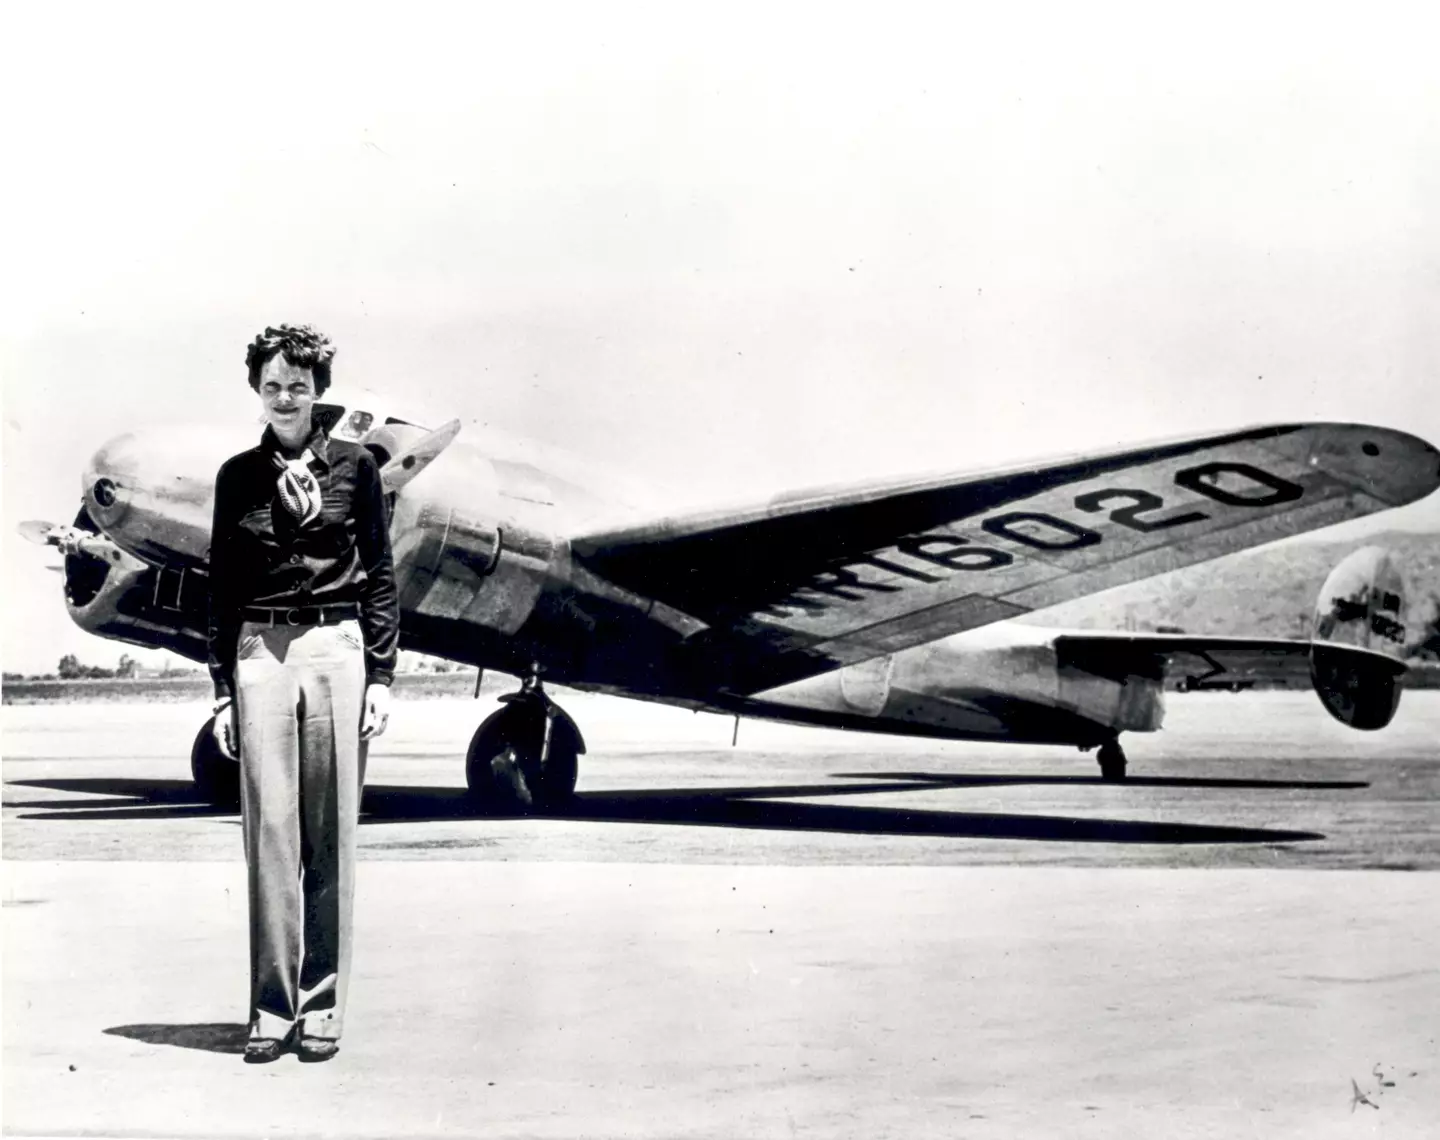 Amelia Earhart was one of the most famous and accomplished pilots of her era.